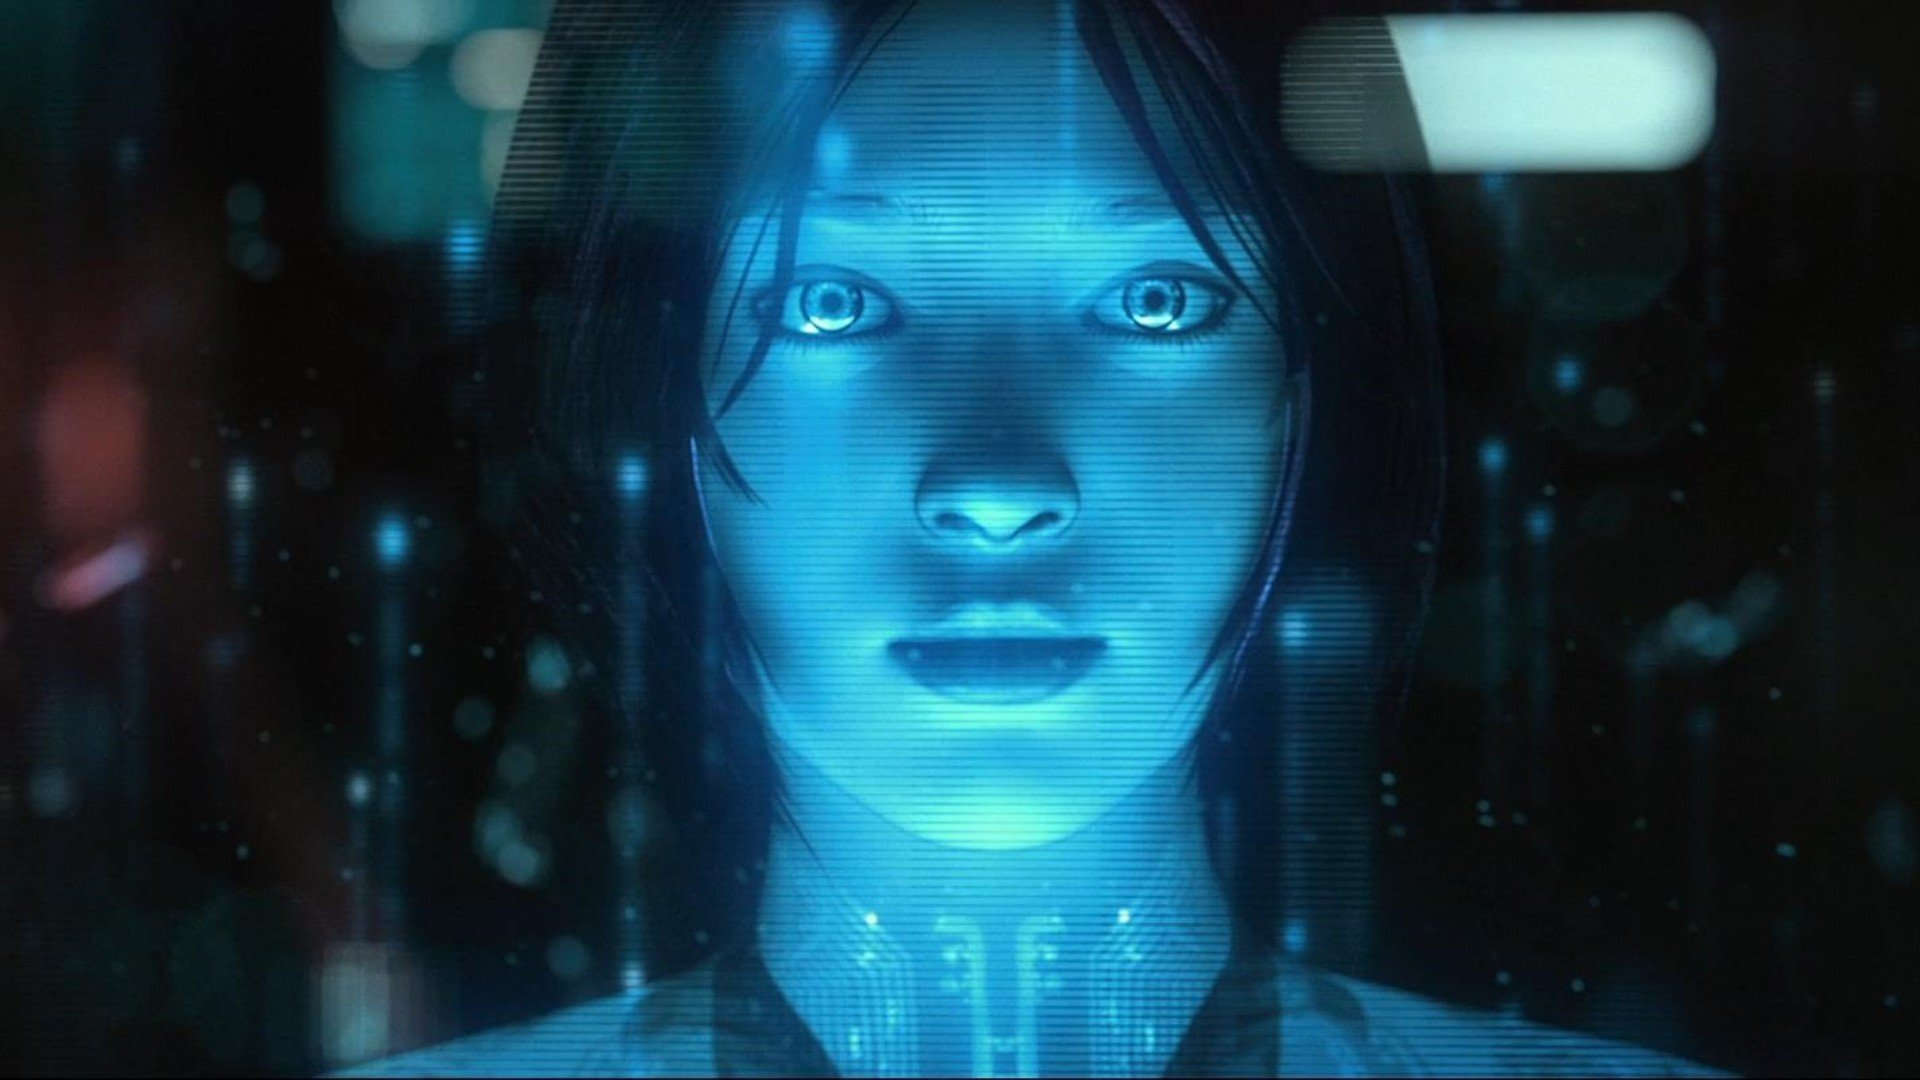 Crowd Funding Campaign To Bring Holograms To Households - Cortana Wallpaper Hd , HD Wallpaper & Backgrounds